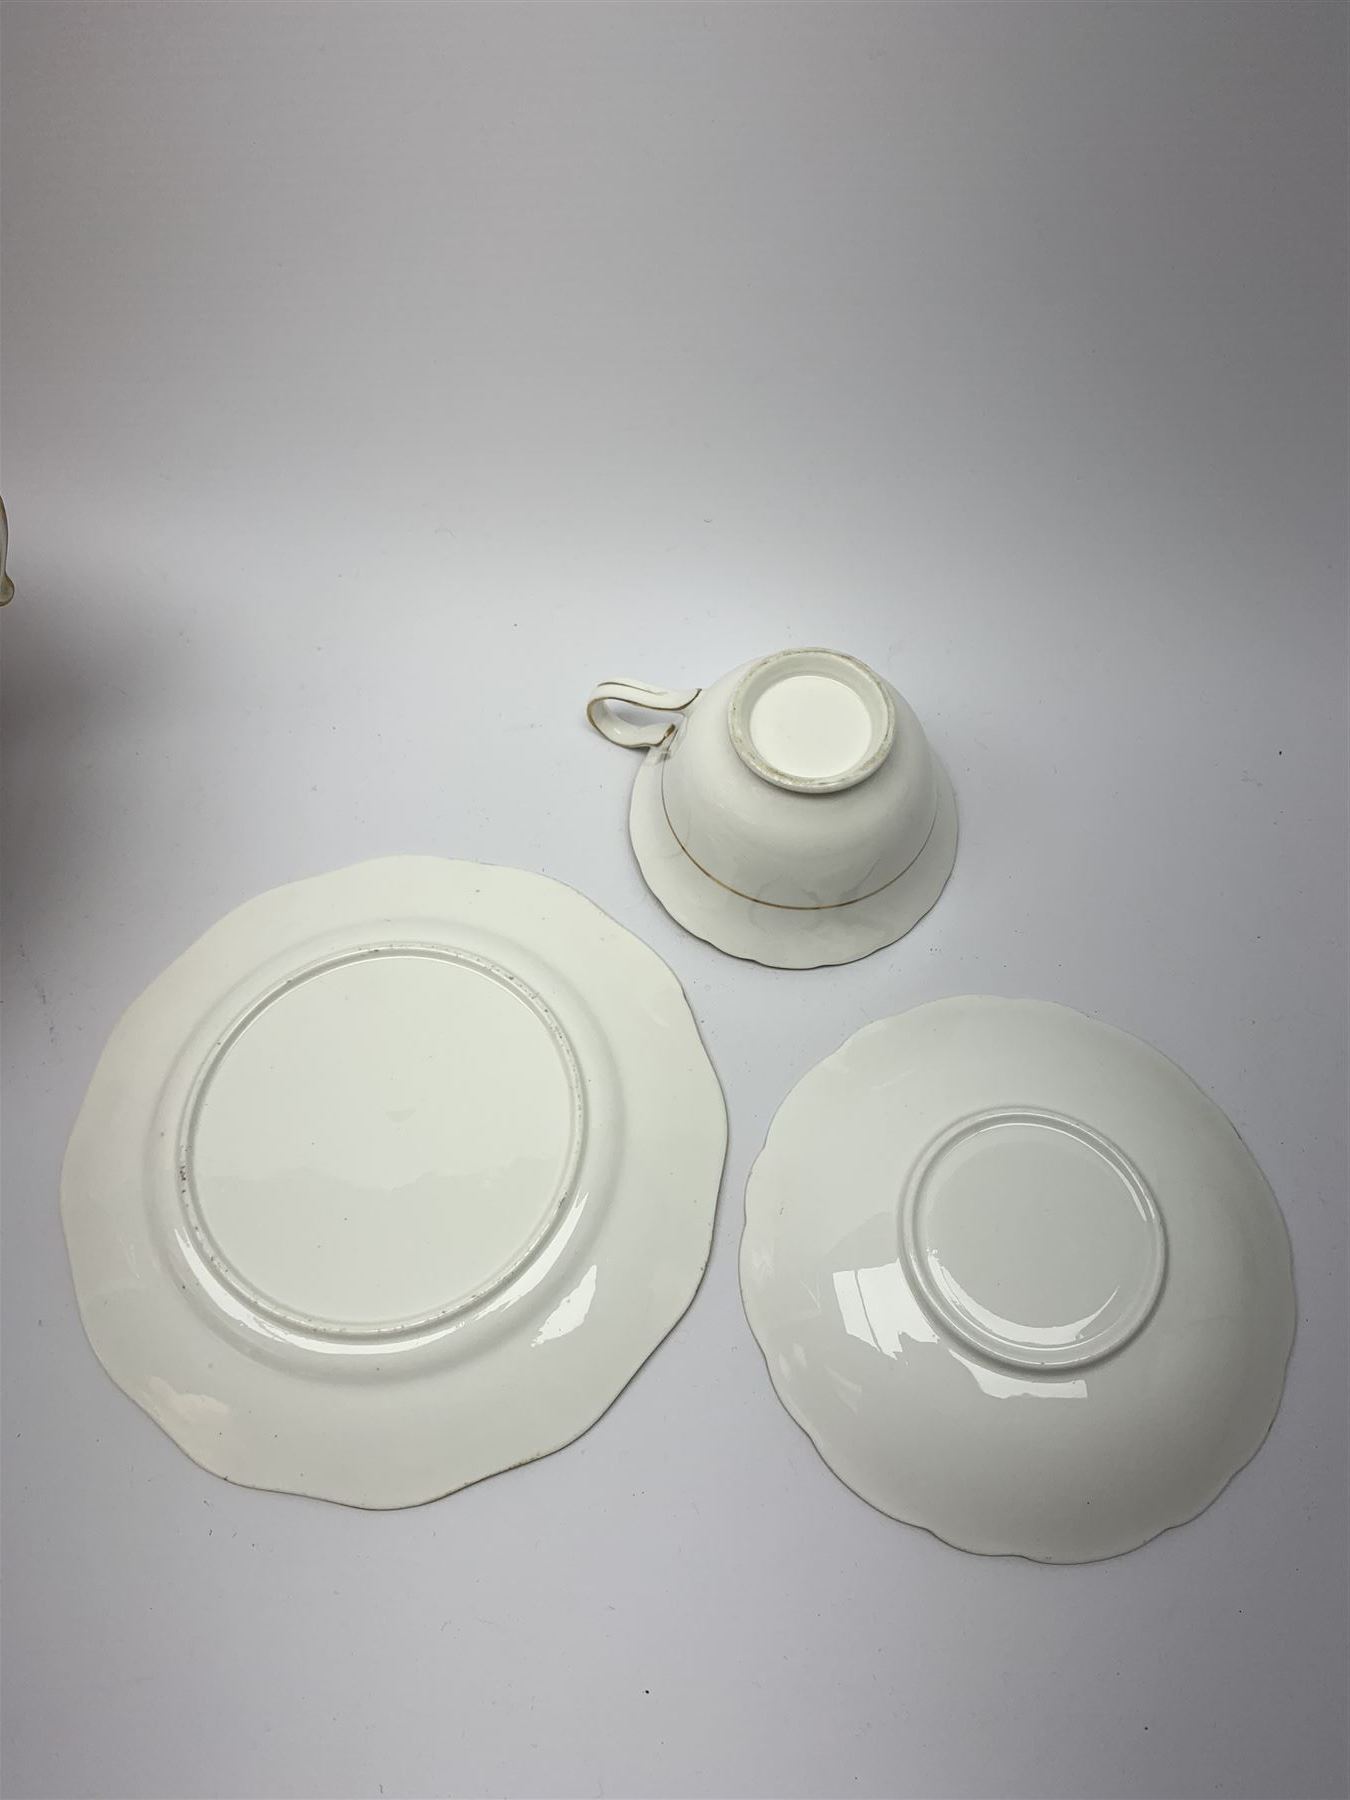 Early 19th century Daniel tea set for one - Image 5 of 9